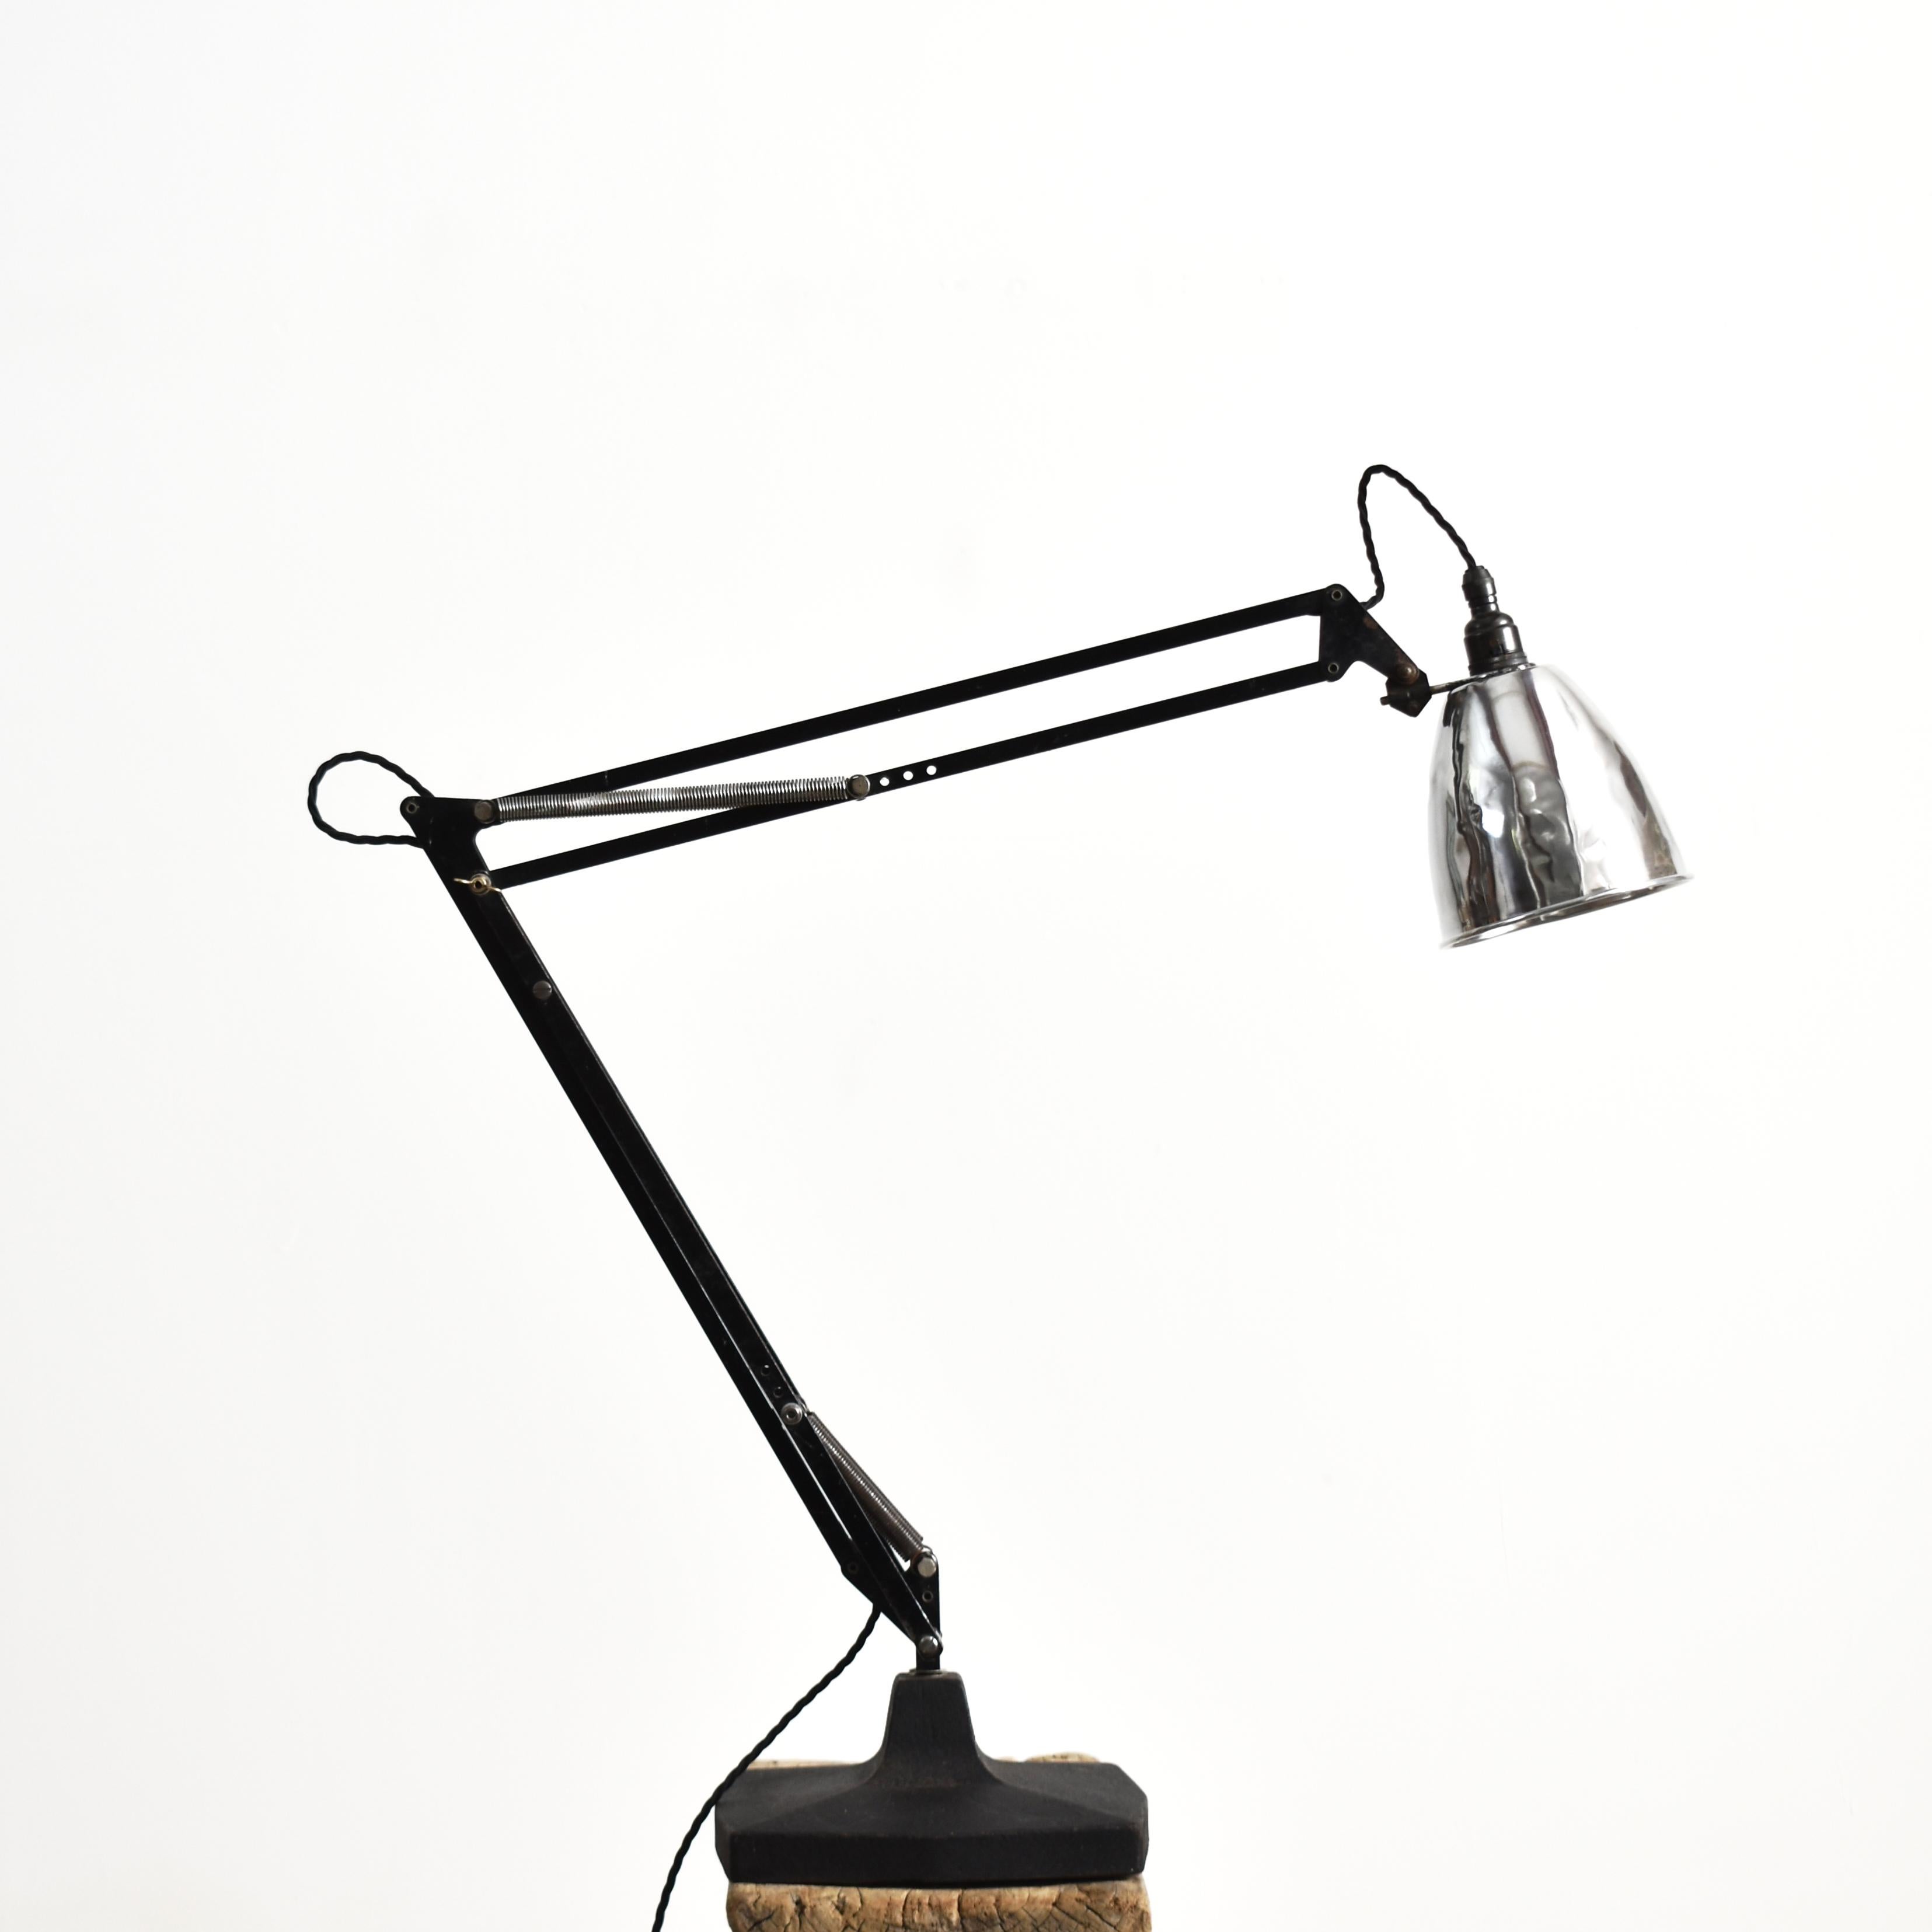 20th Century Original Anglepoise Desk Lamp 1209 Model By Herbert Terry & Sons For Sale